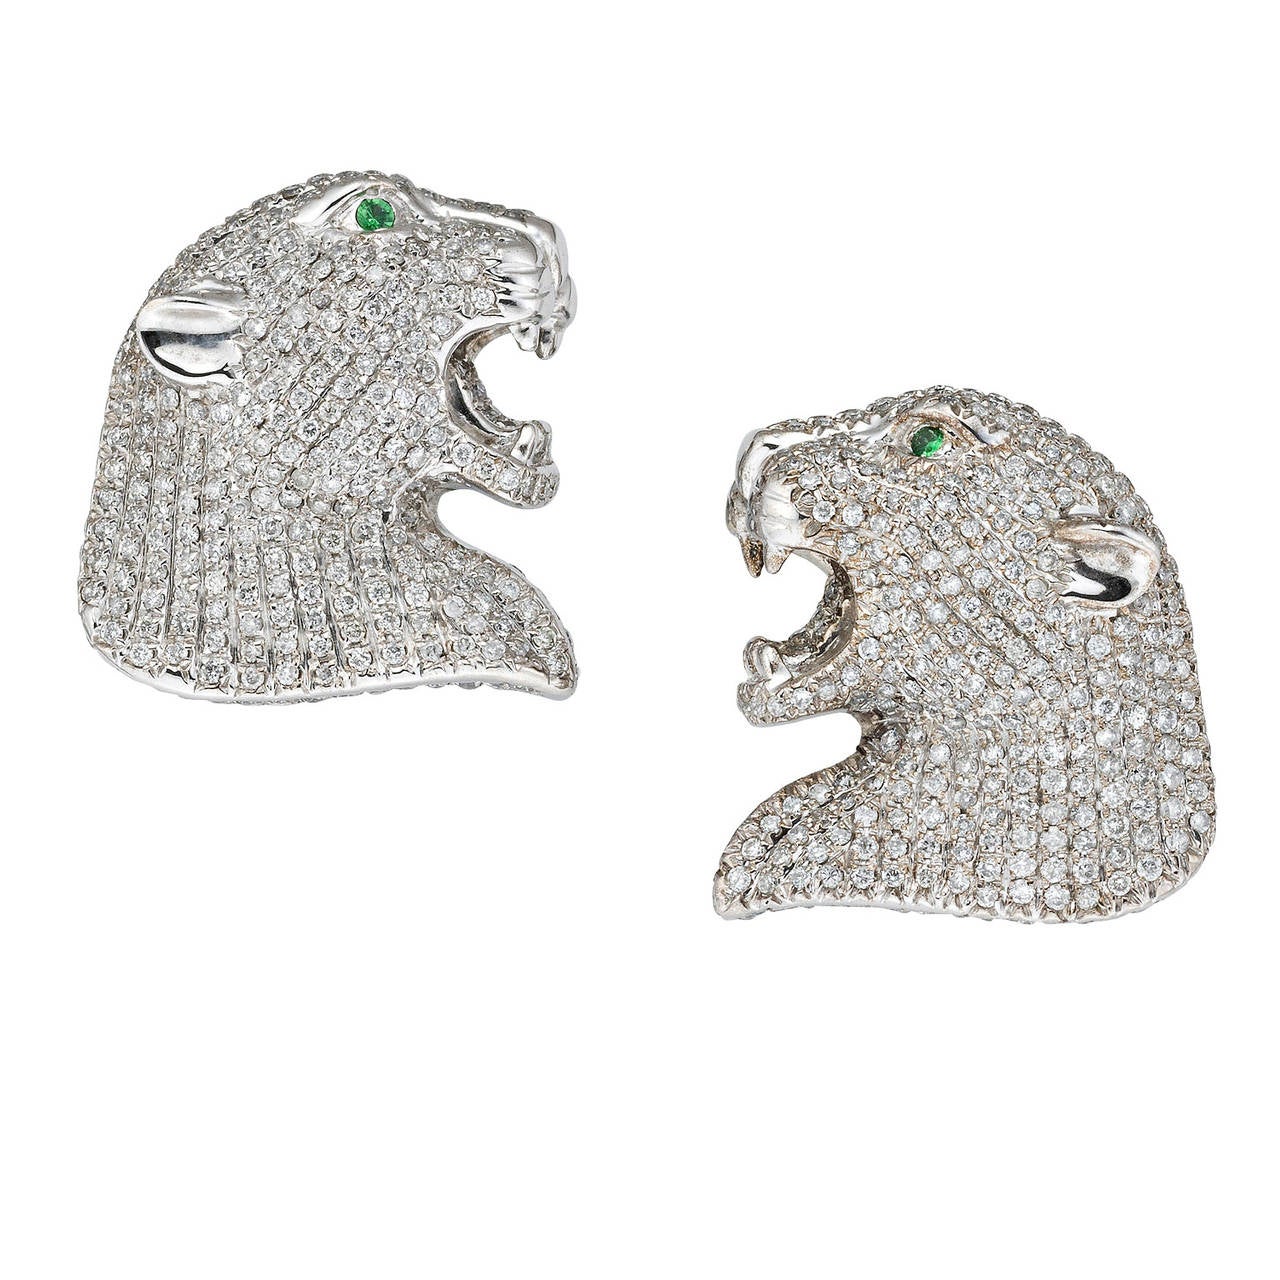 Cartier-Style Panther Diamond Encrusted Earrings